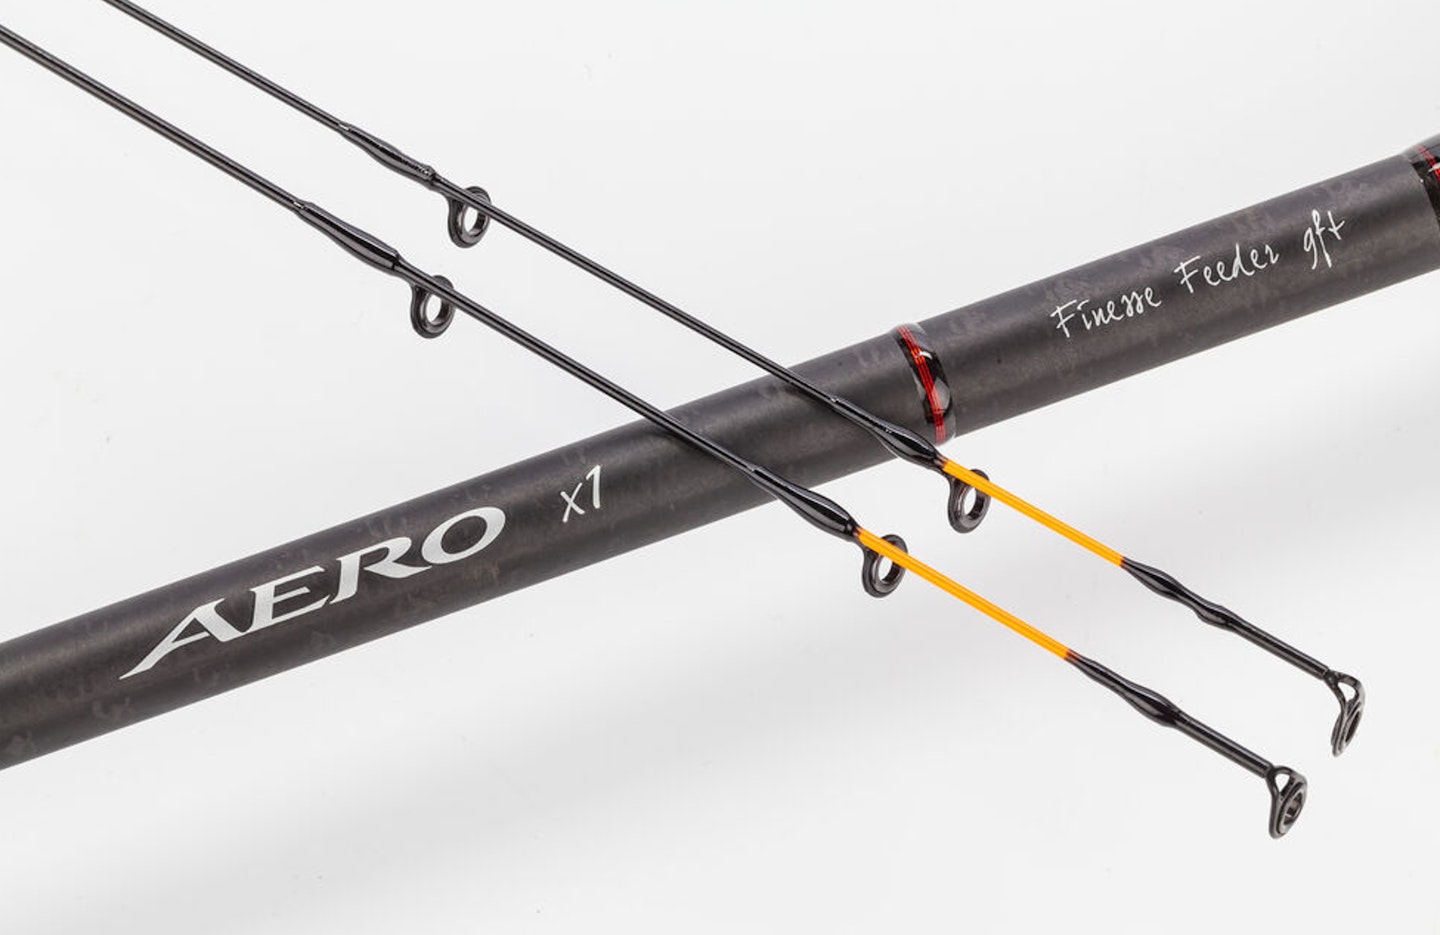 Shimano 9ft Finesse Feeder rod review